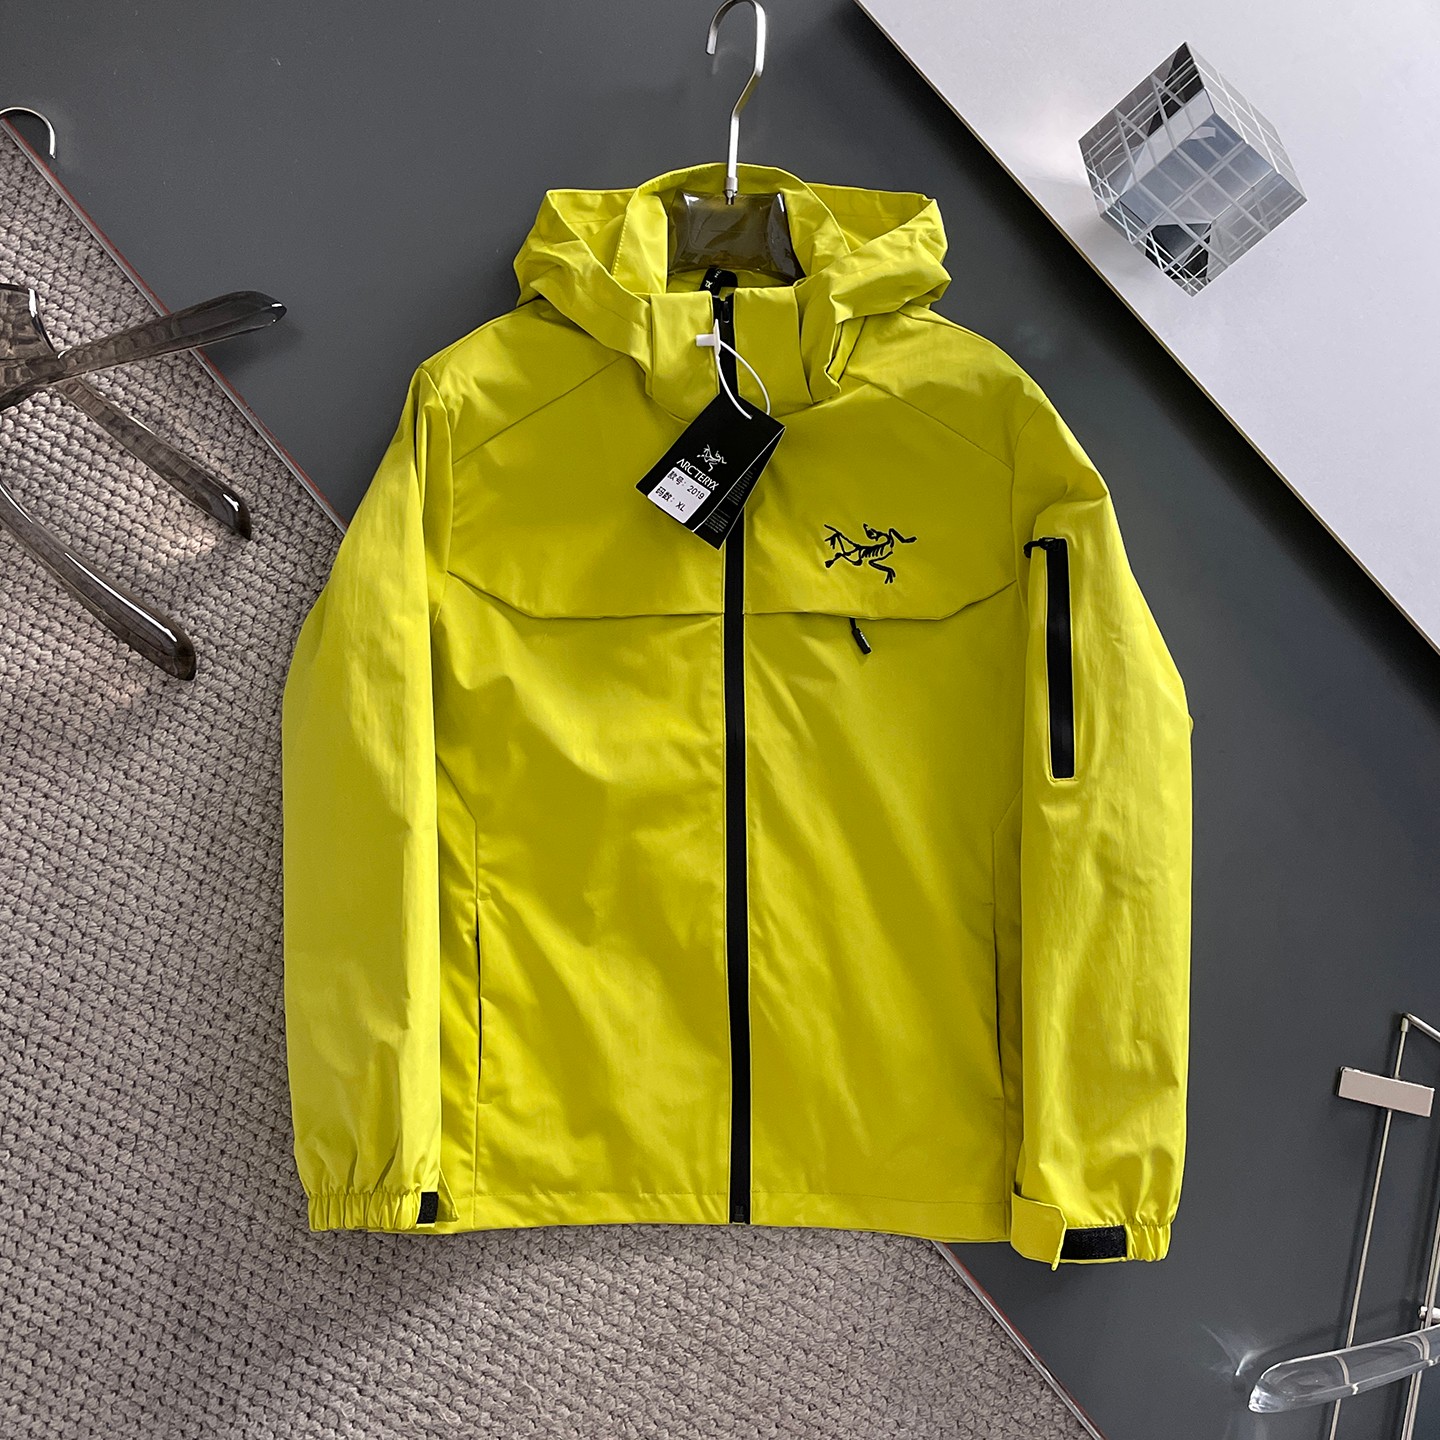 Arc’teryx Clothing Coats & Jackets Knockoff Highest Quality
 Men Spring Collection Casual